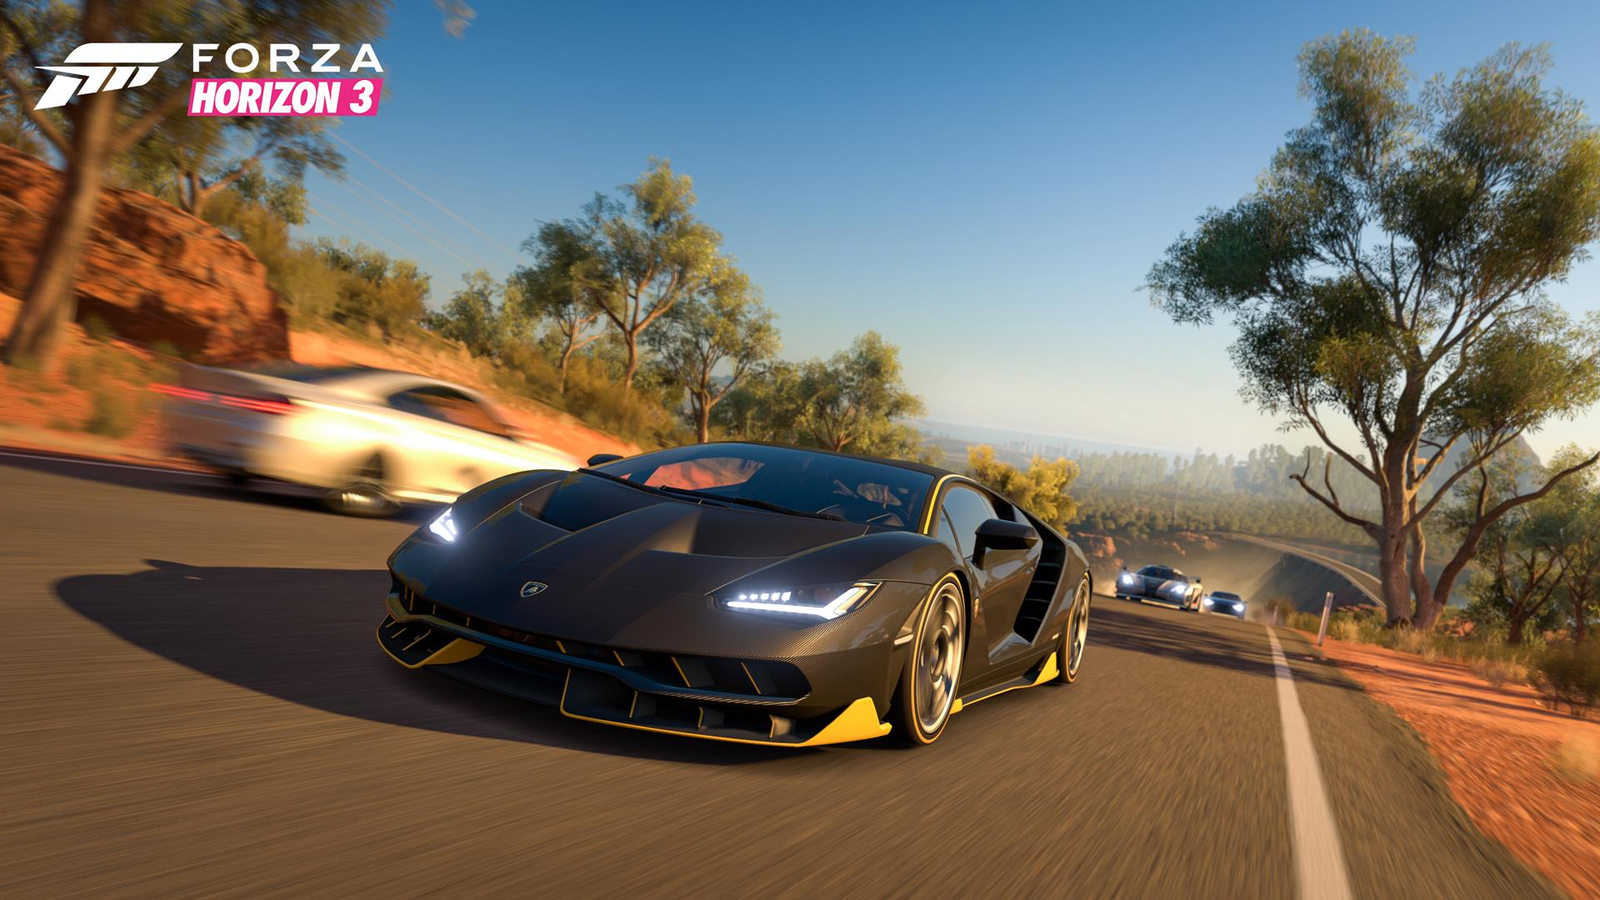 Forza Horizon 3 demo is available to download on Xbox One today